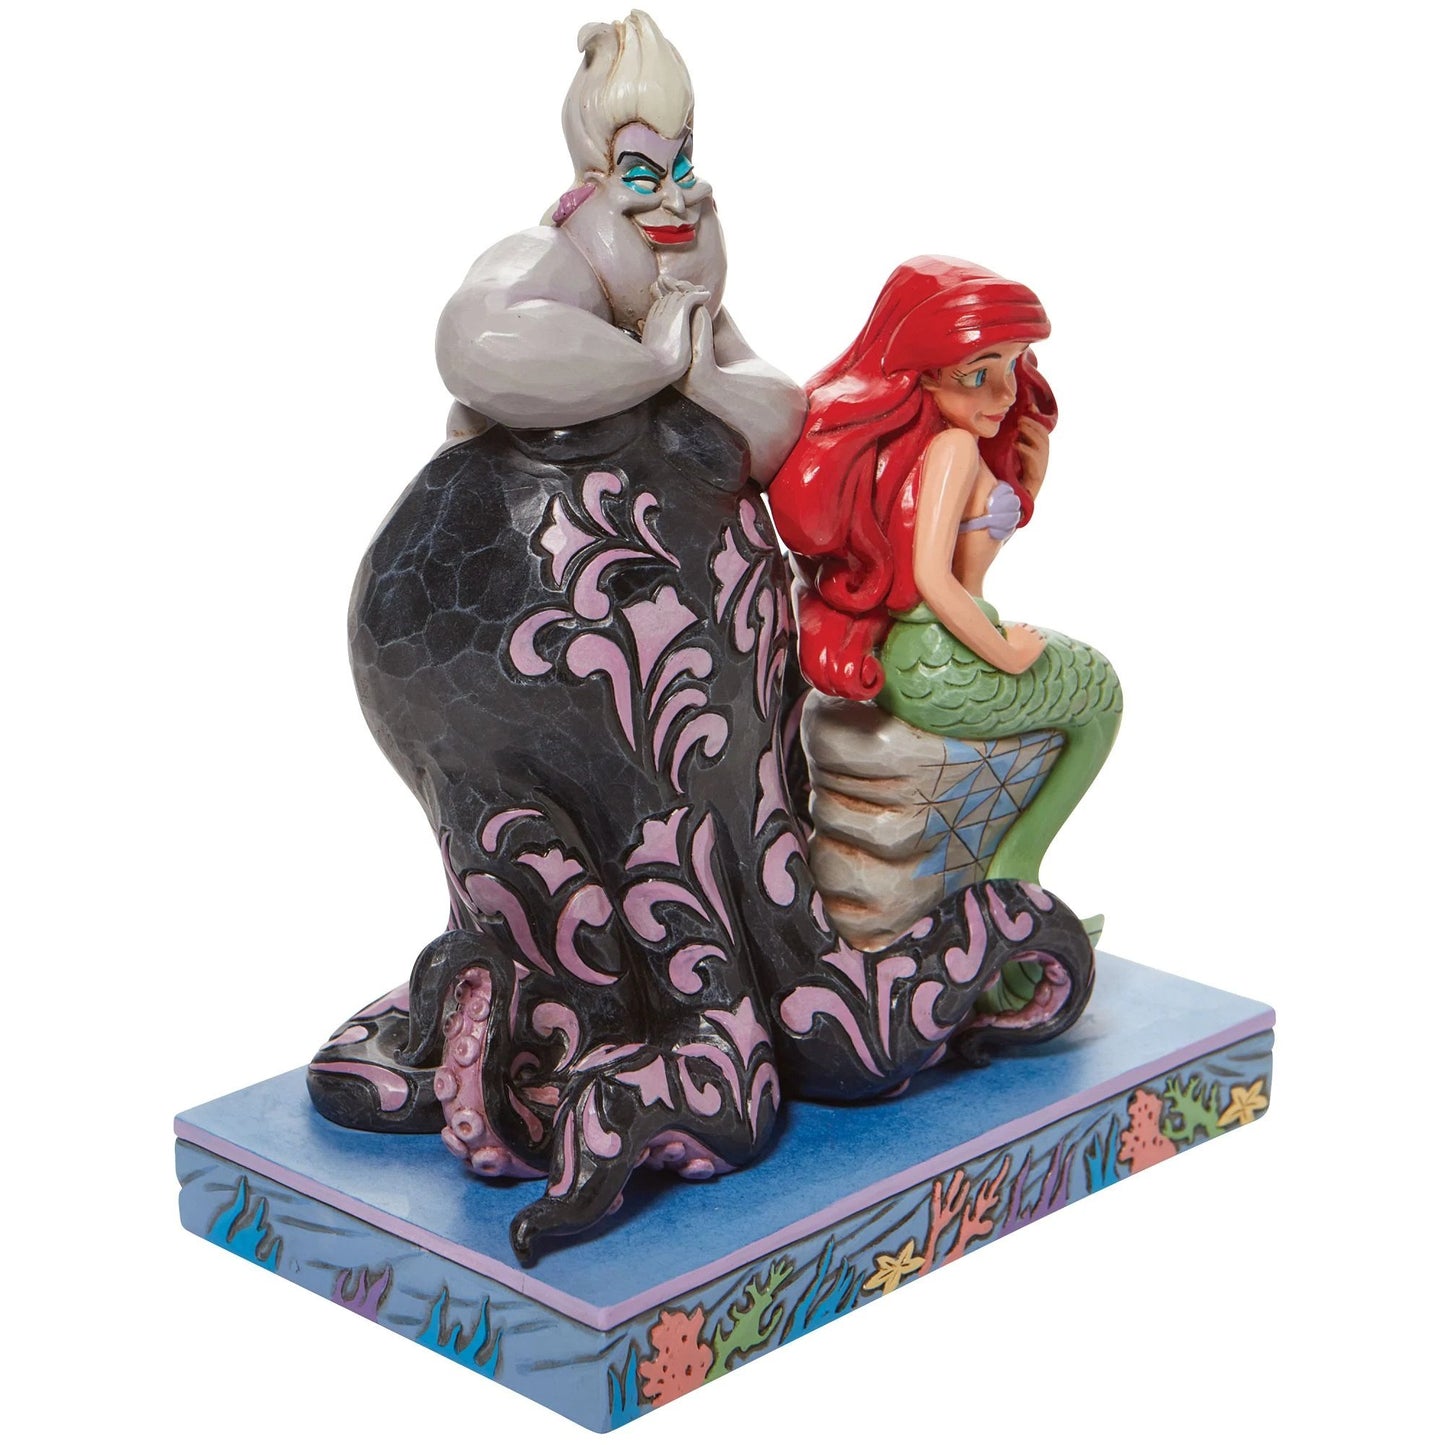 Enesco Disney Traditions - "Wicked And Wishful" - Ariel & Ursula Figure by Jim Shore, 9.5"